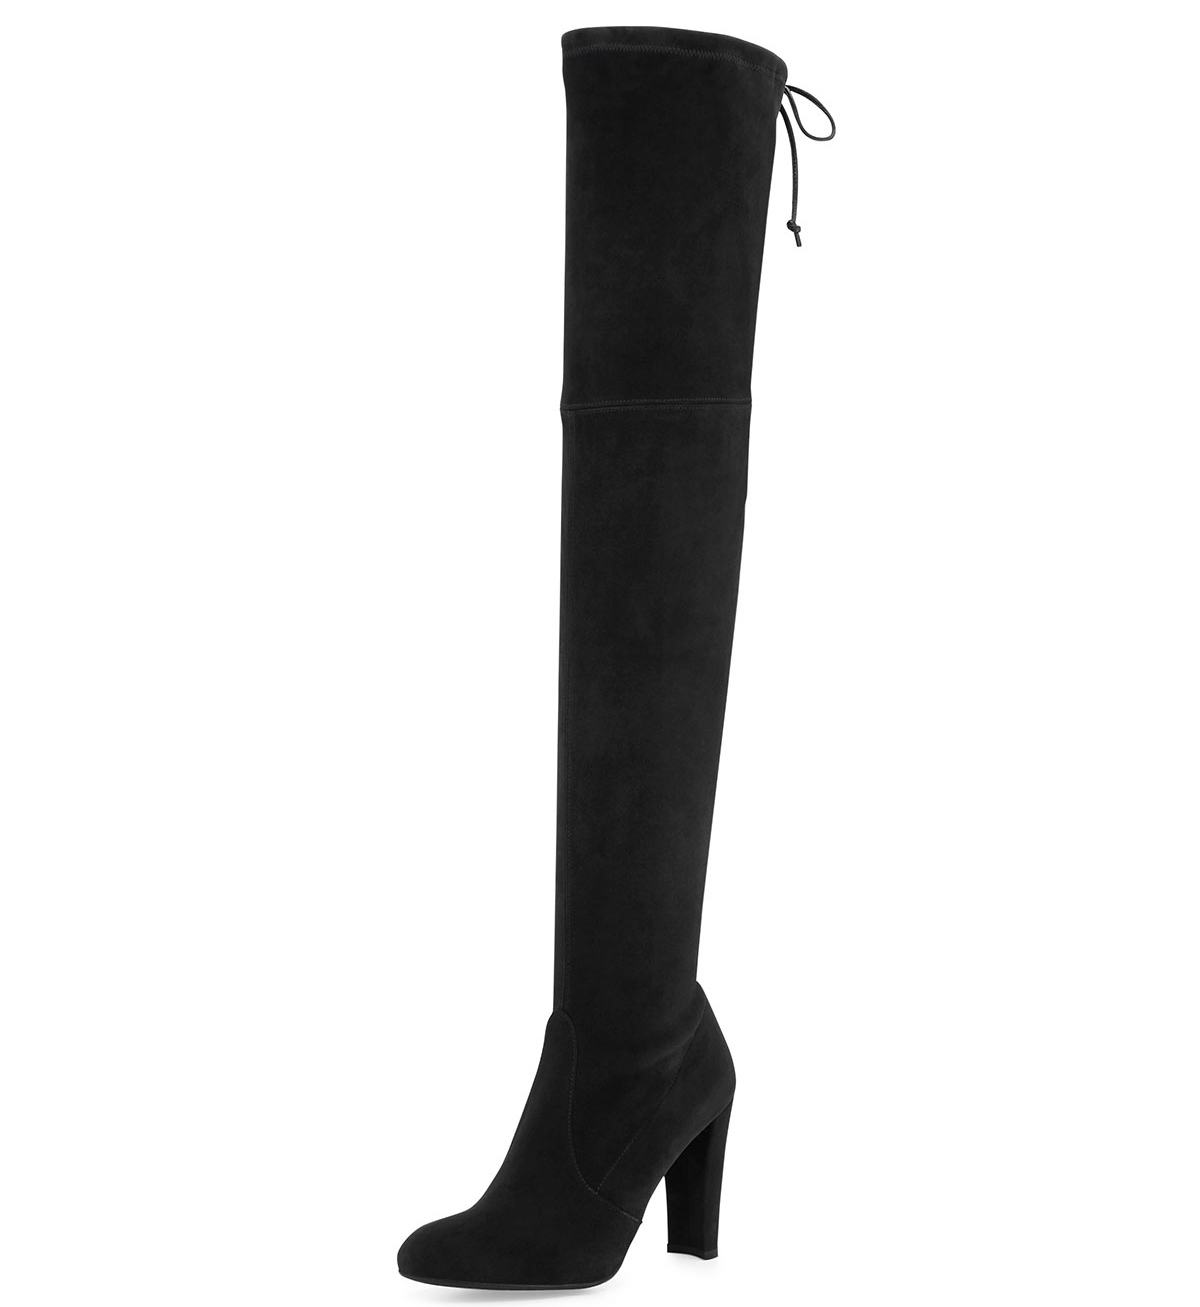 Stuart Weitzman Highland Stretchy Suede Over-the-Knee Boot